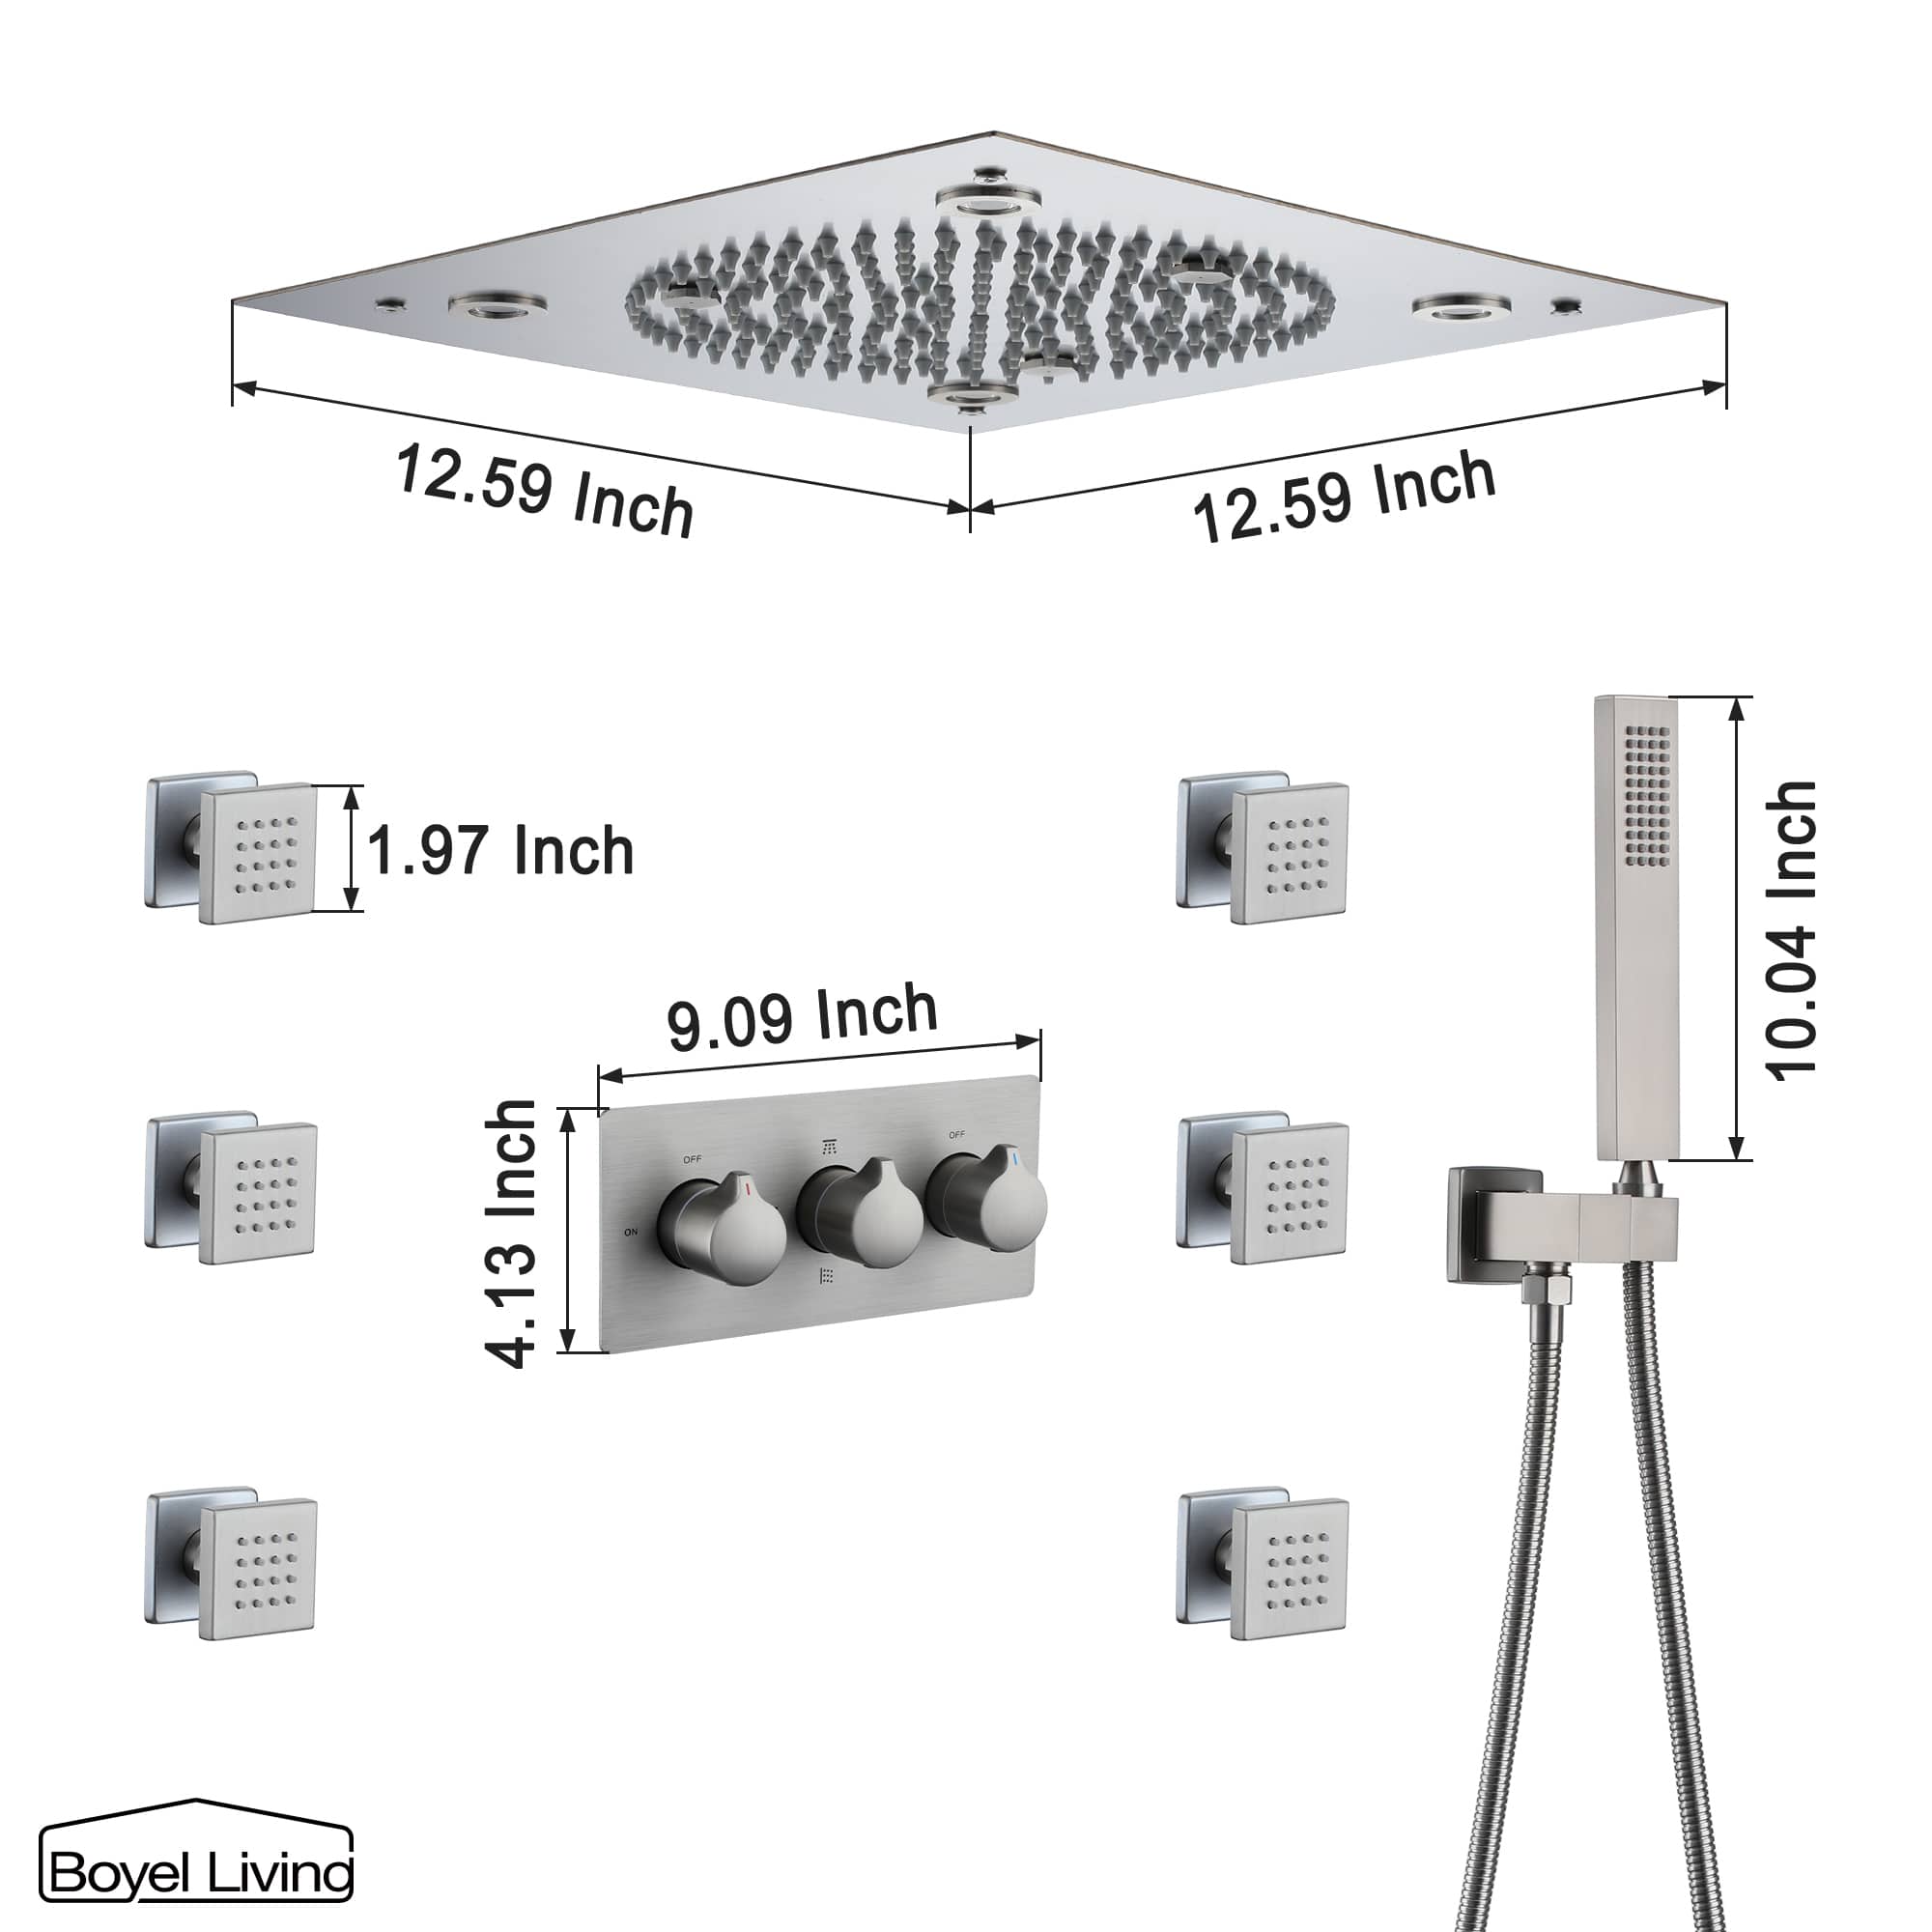 Luxury LED Shower System Dimensions